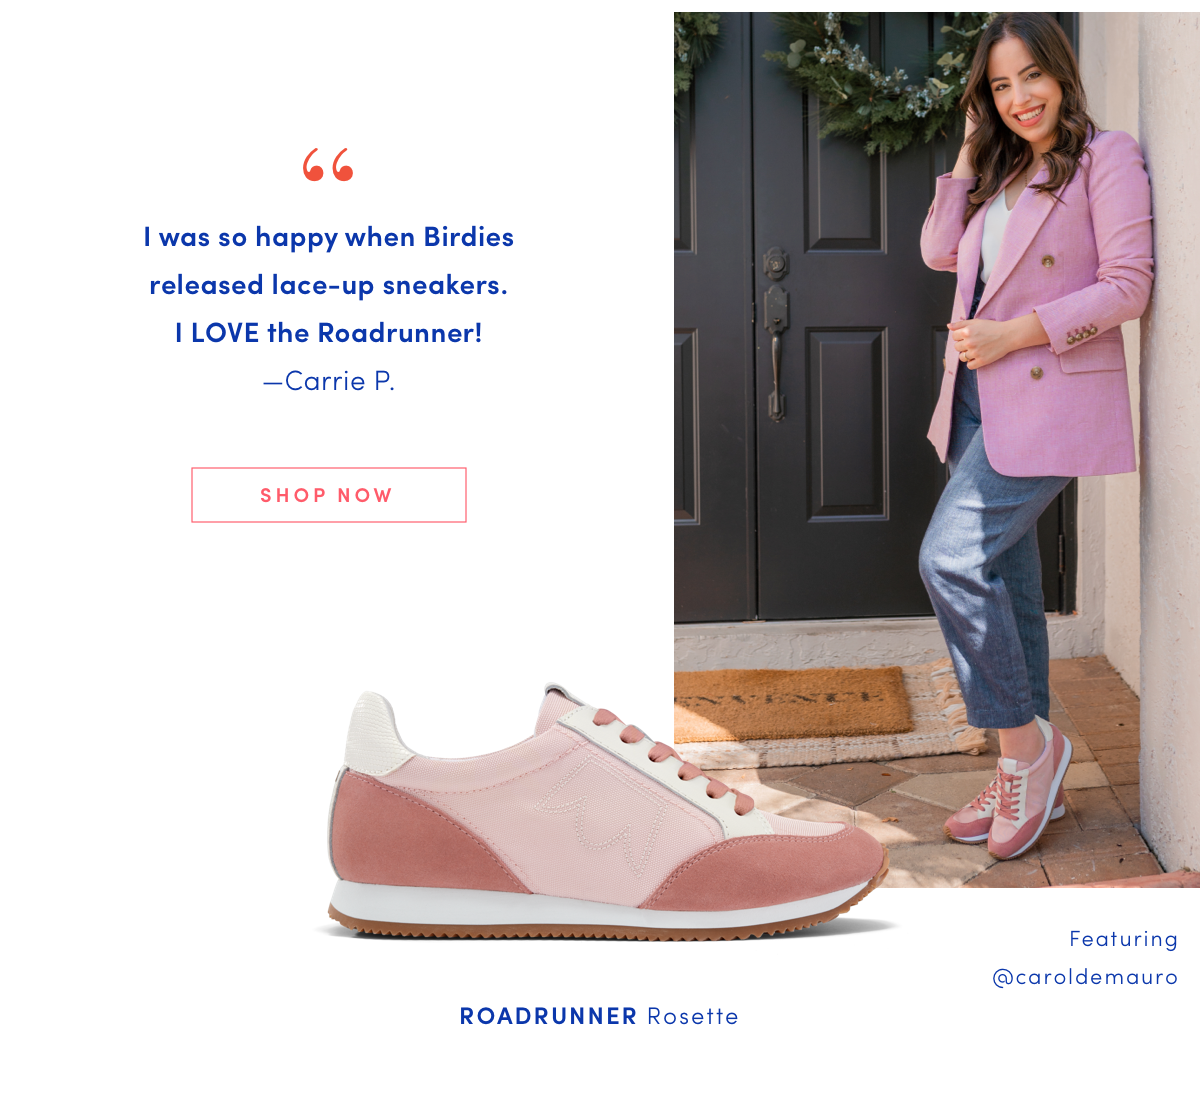 "I was so happy when Birdies released lace-up sneakers. I LOVE the Roadrunner! -Carrie P. SHOP NOW